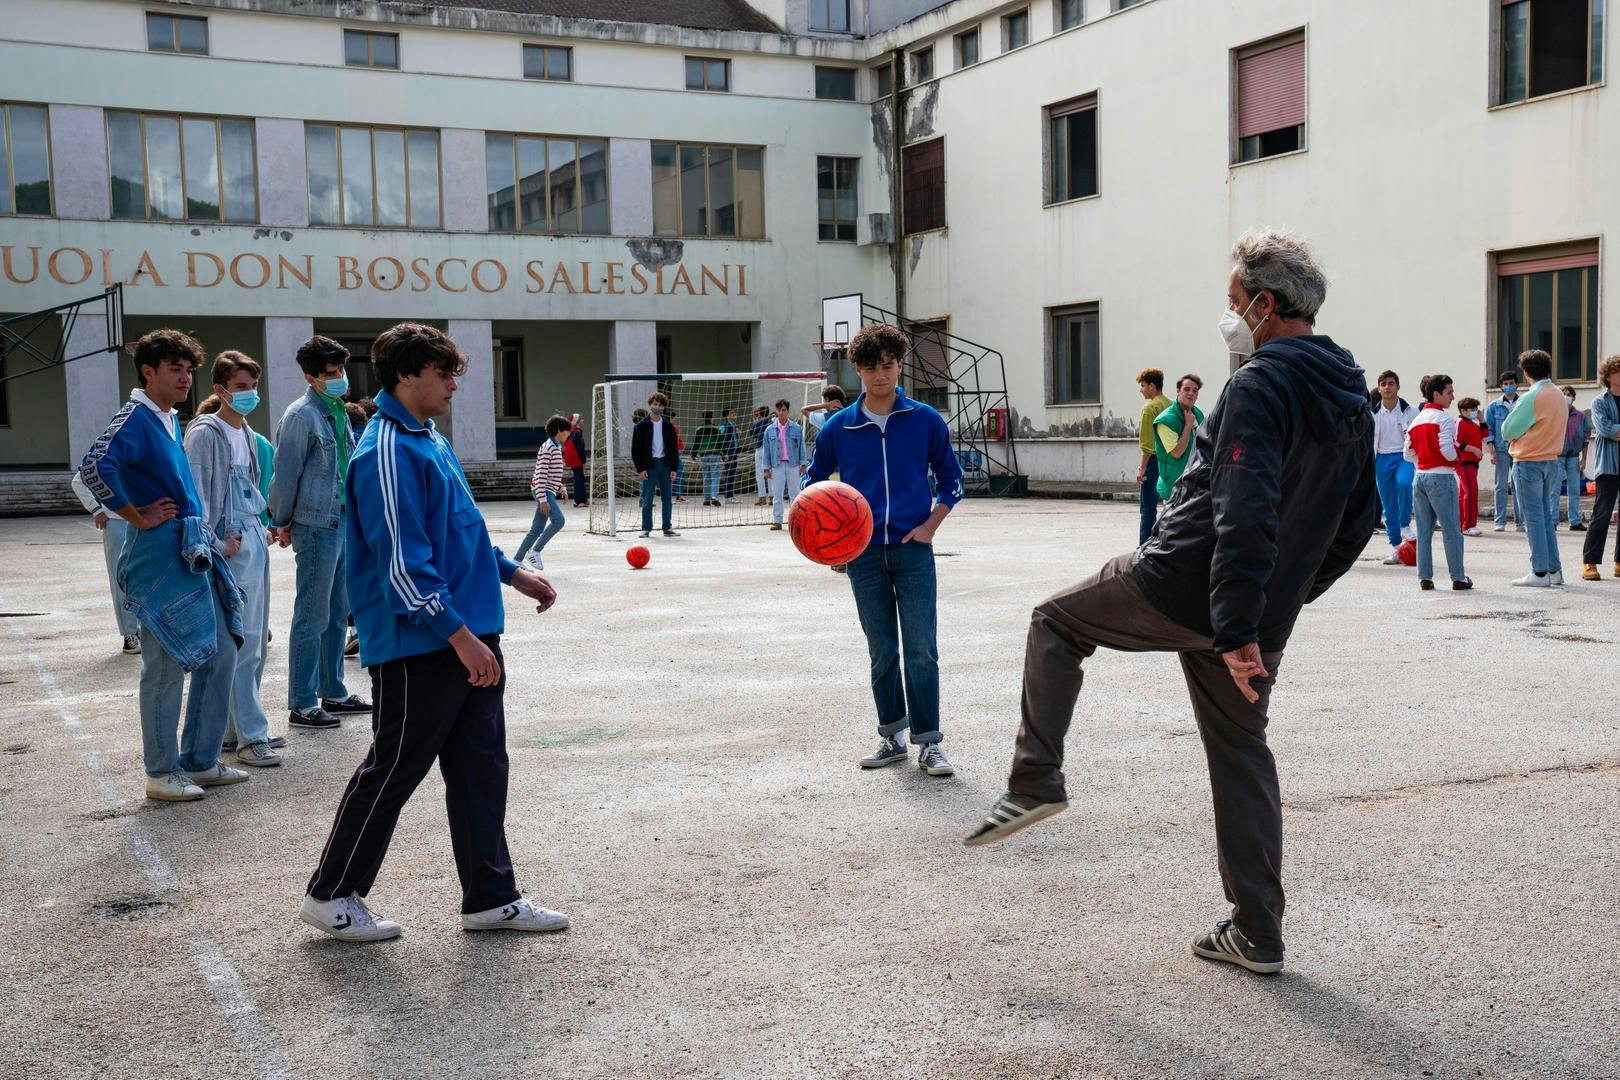 A scene of boys and Paolo Sorrentino behind a cement building. Many of the boys wear blue track jackets and most of the figures are masked. Sorrentino kicks an orange ball towards one of the other boys.